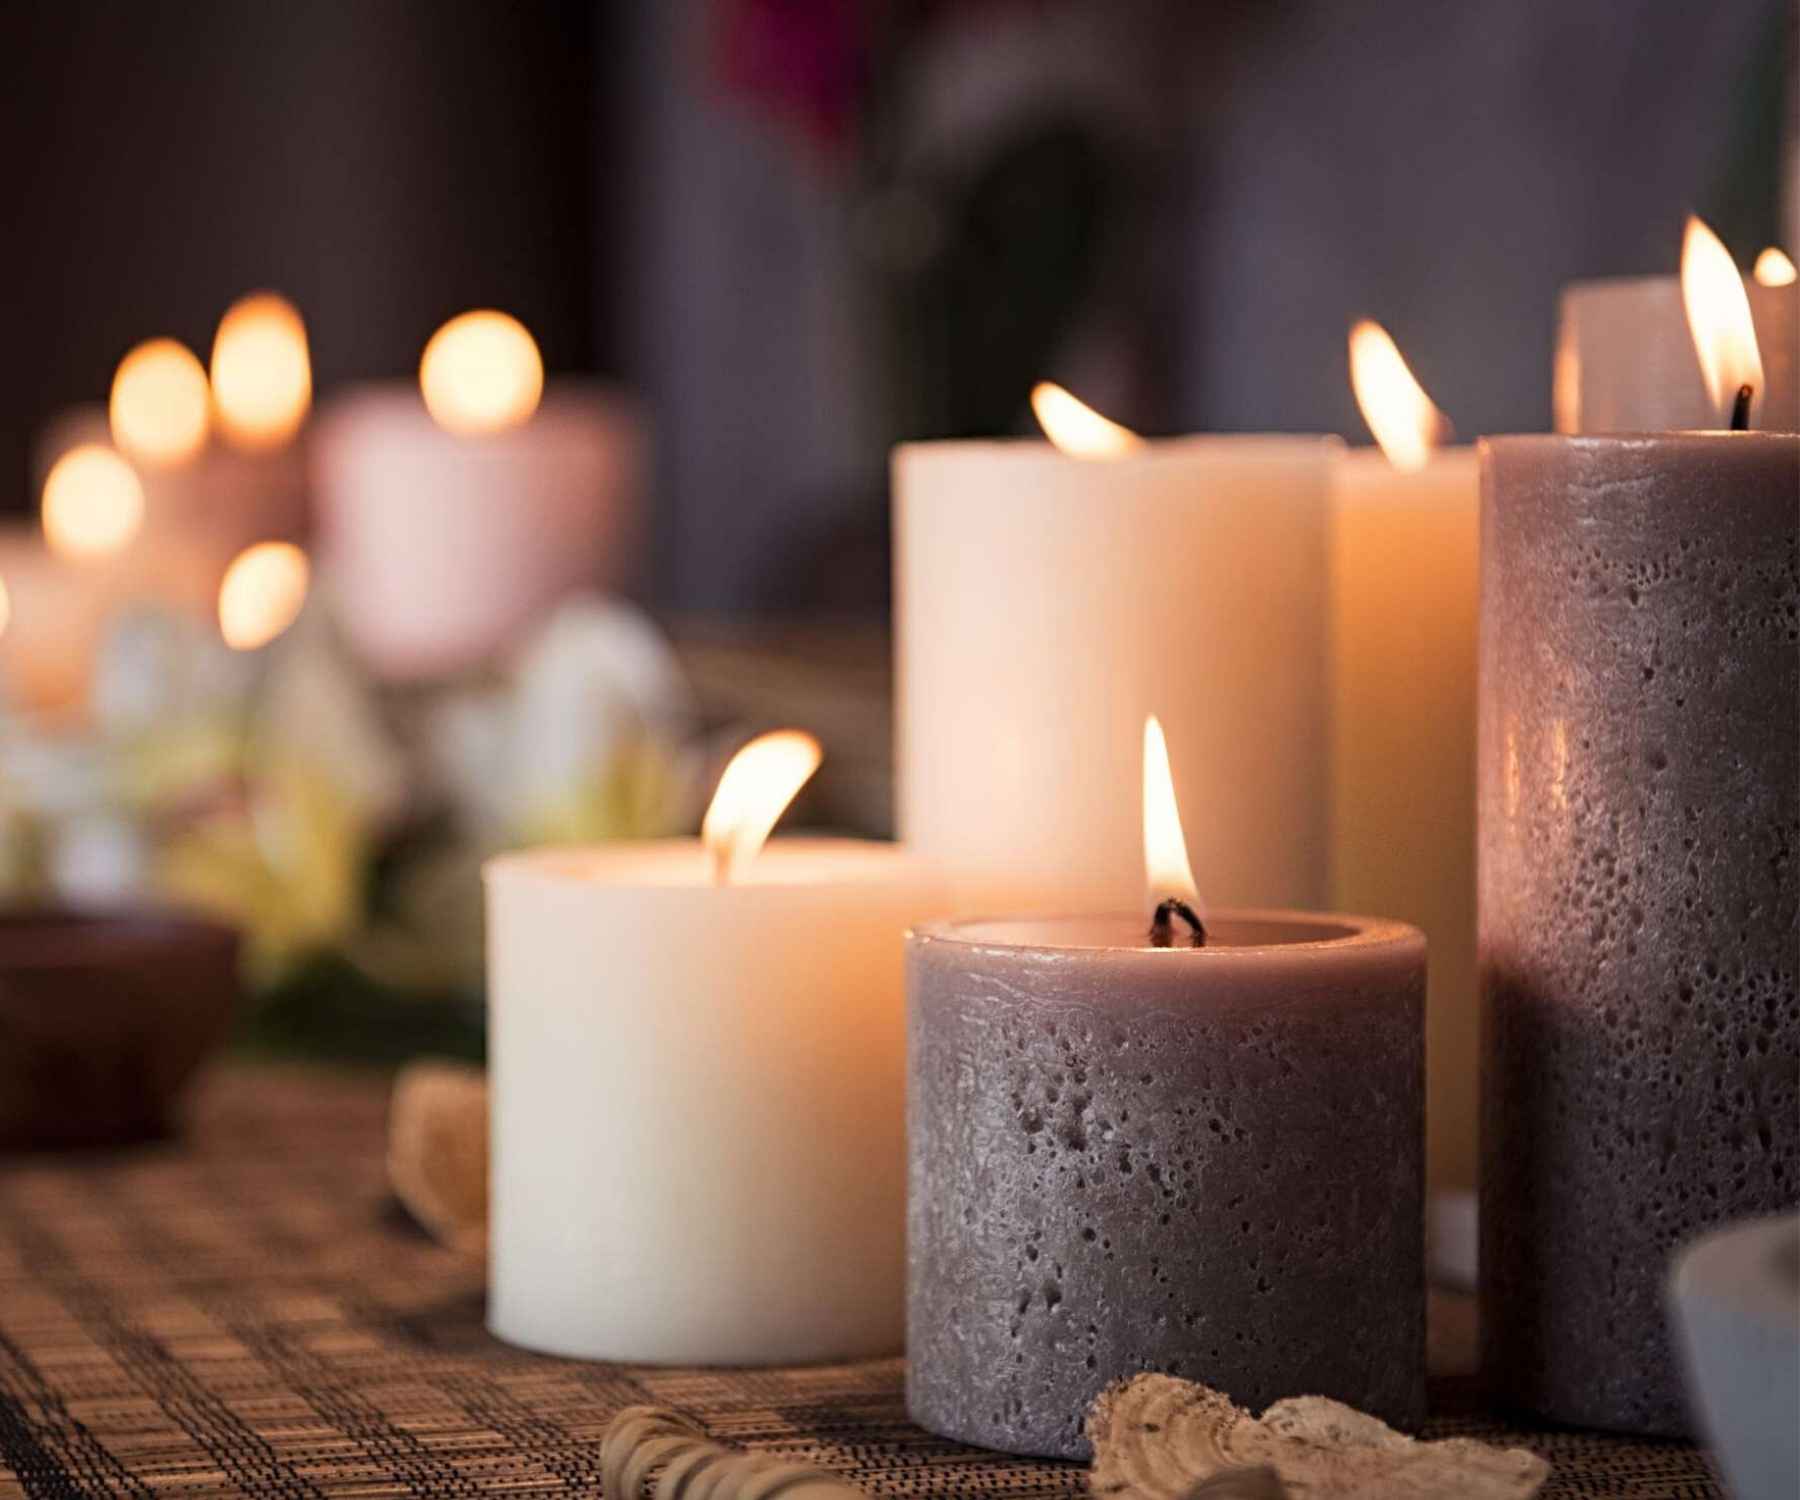 Close up of three lit candles on a wooden table